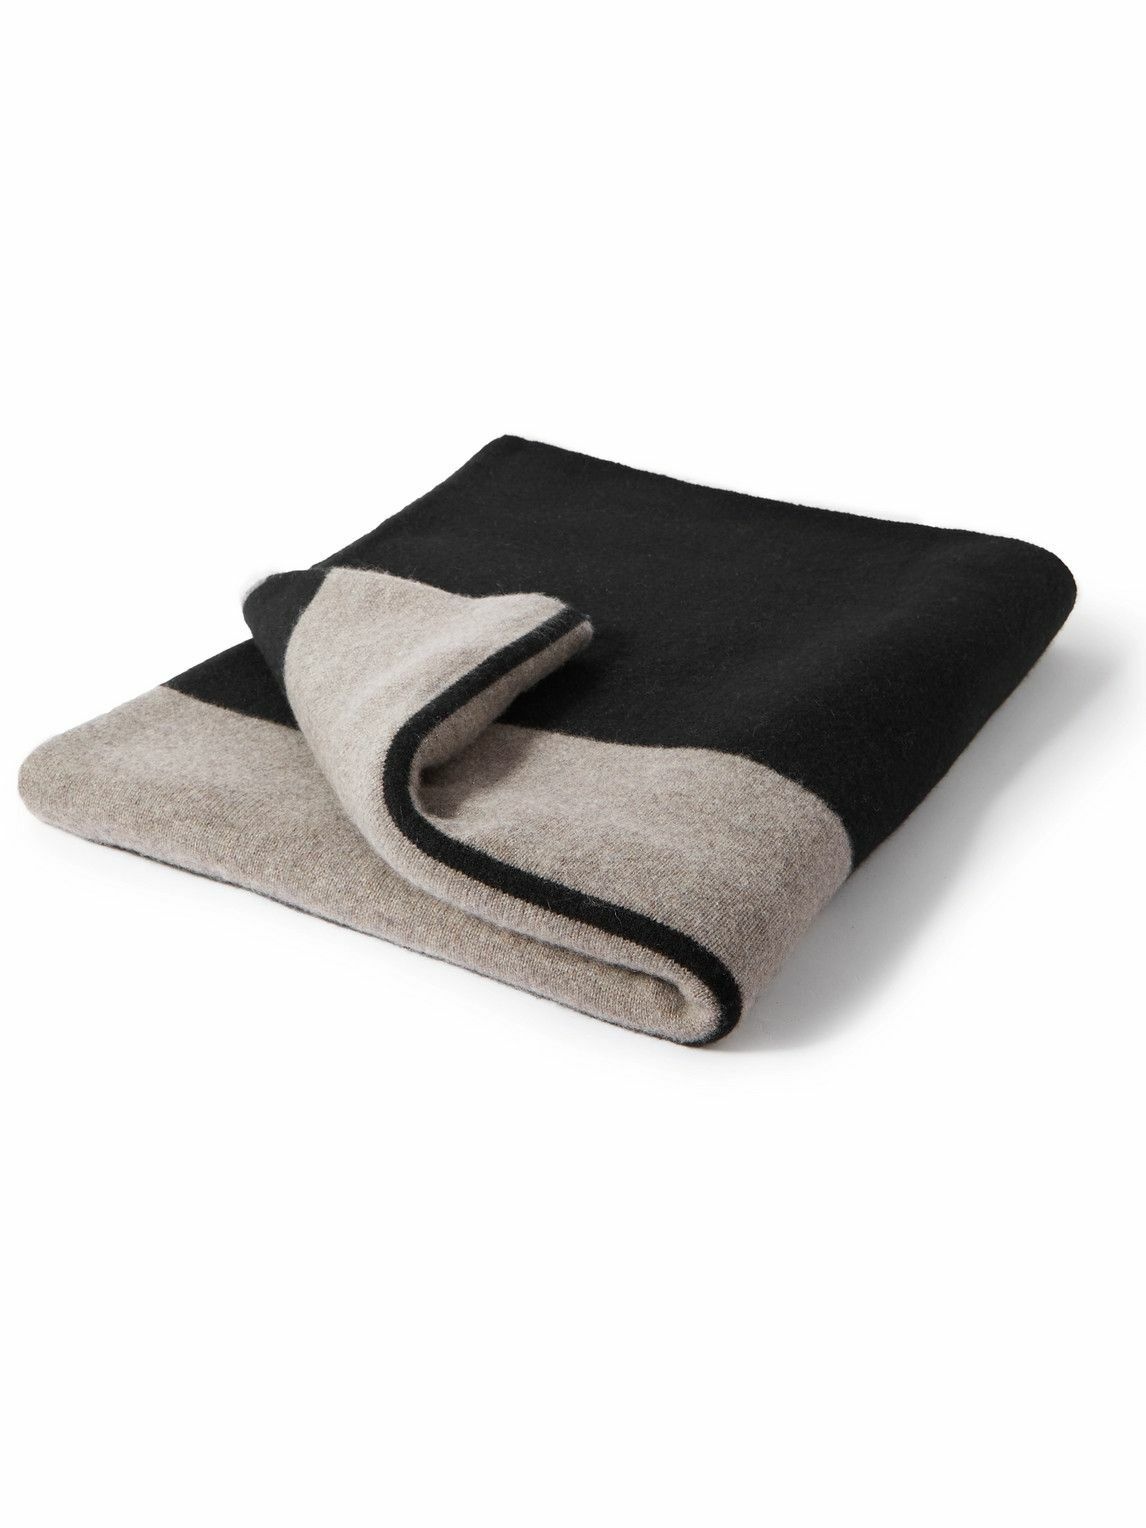 James Perse - Striped Cashmere Blanket James Perse